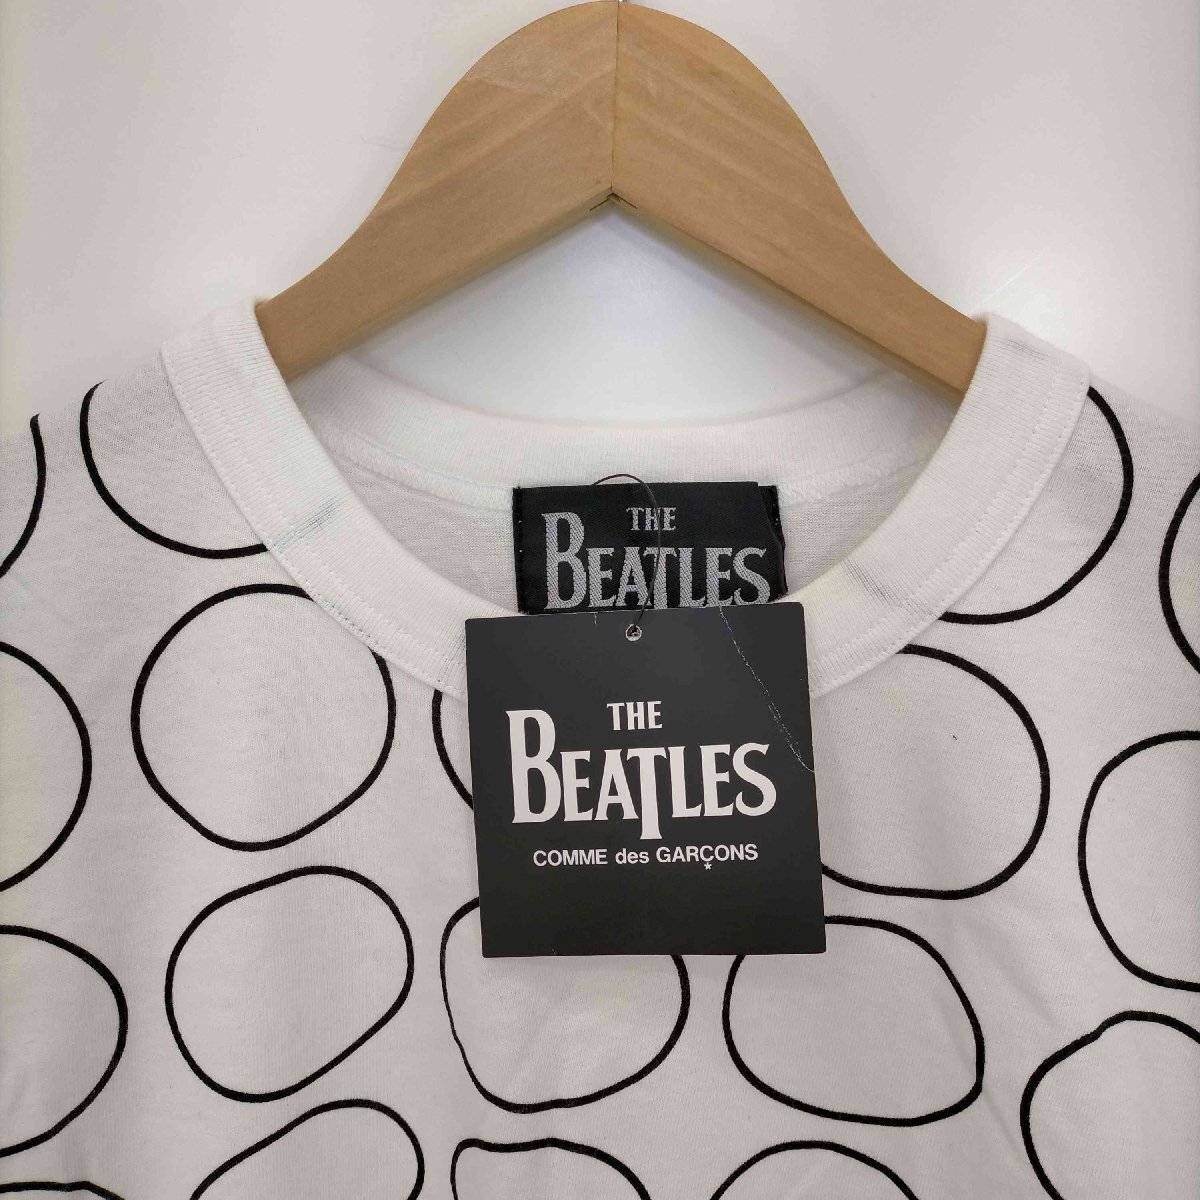 THE BEATLES COMME des GARCONS(ビートルズ コムデギャルソン) Yellow 中古 古着 0347_画像5